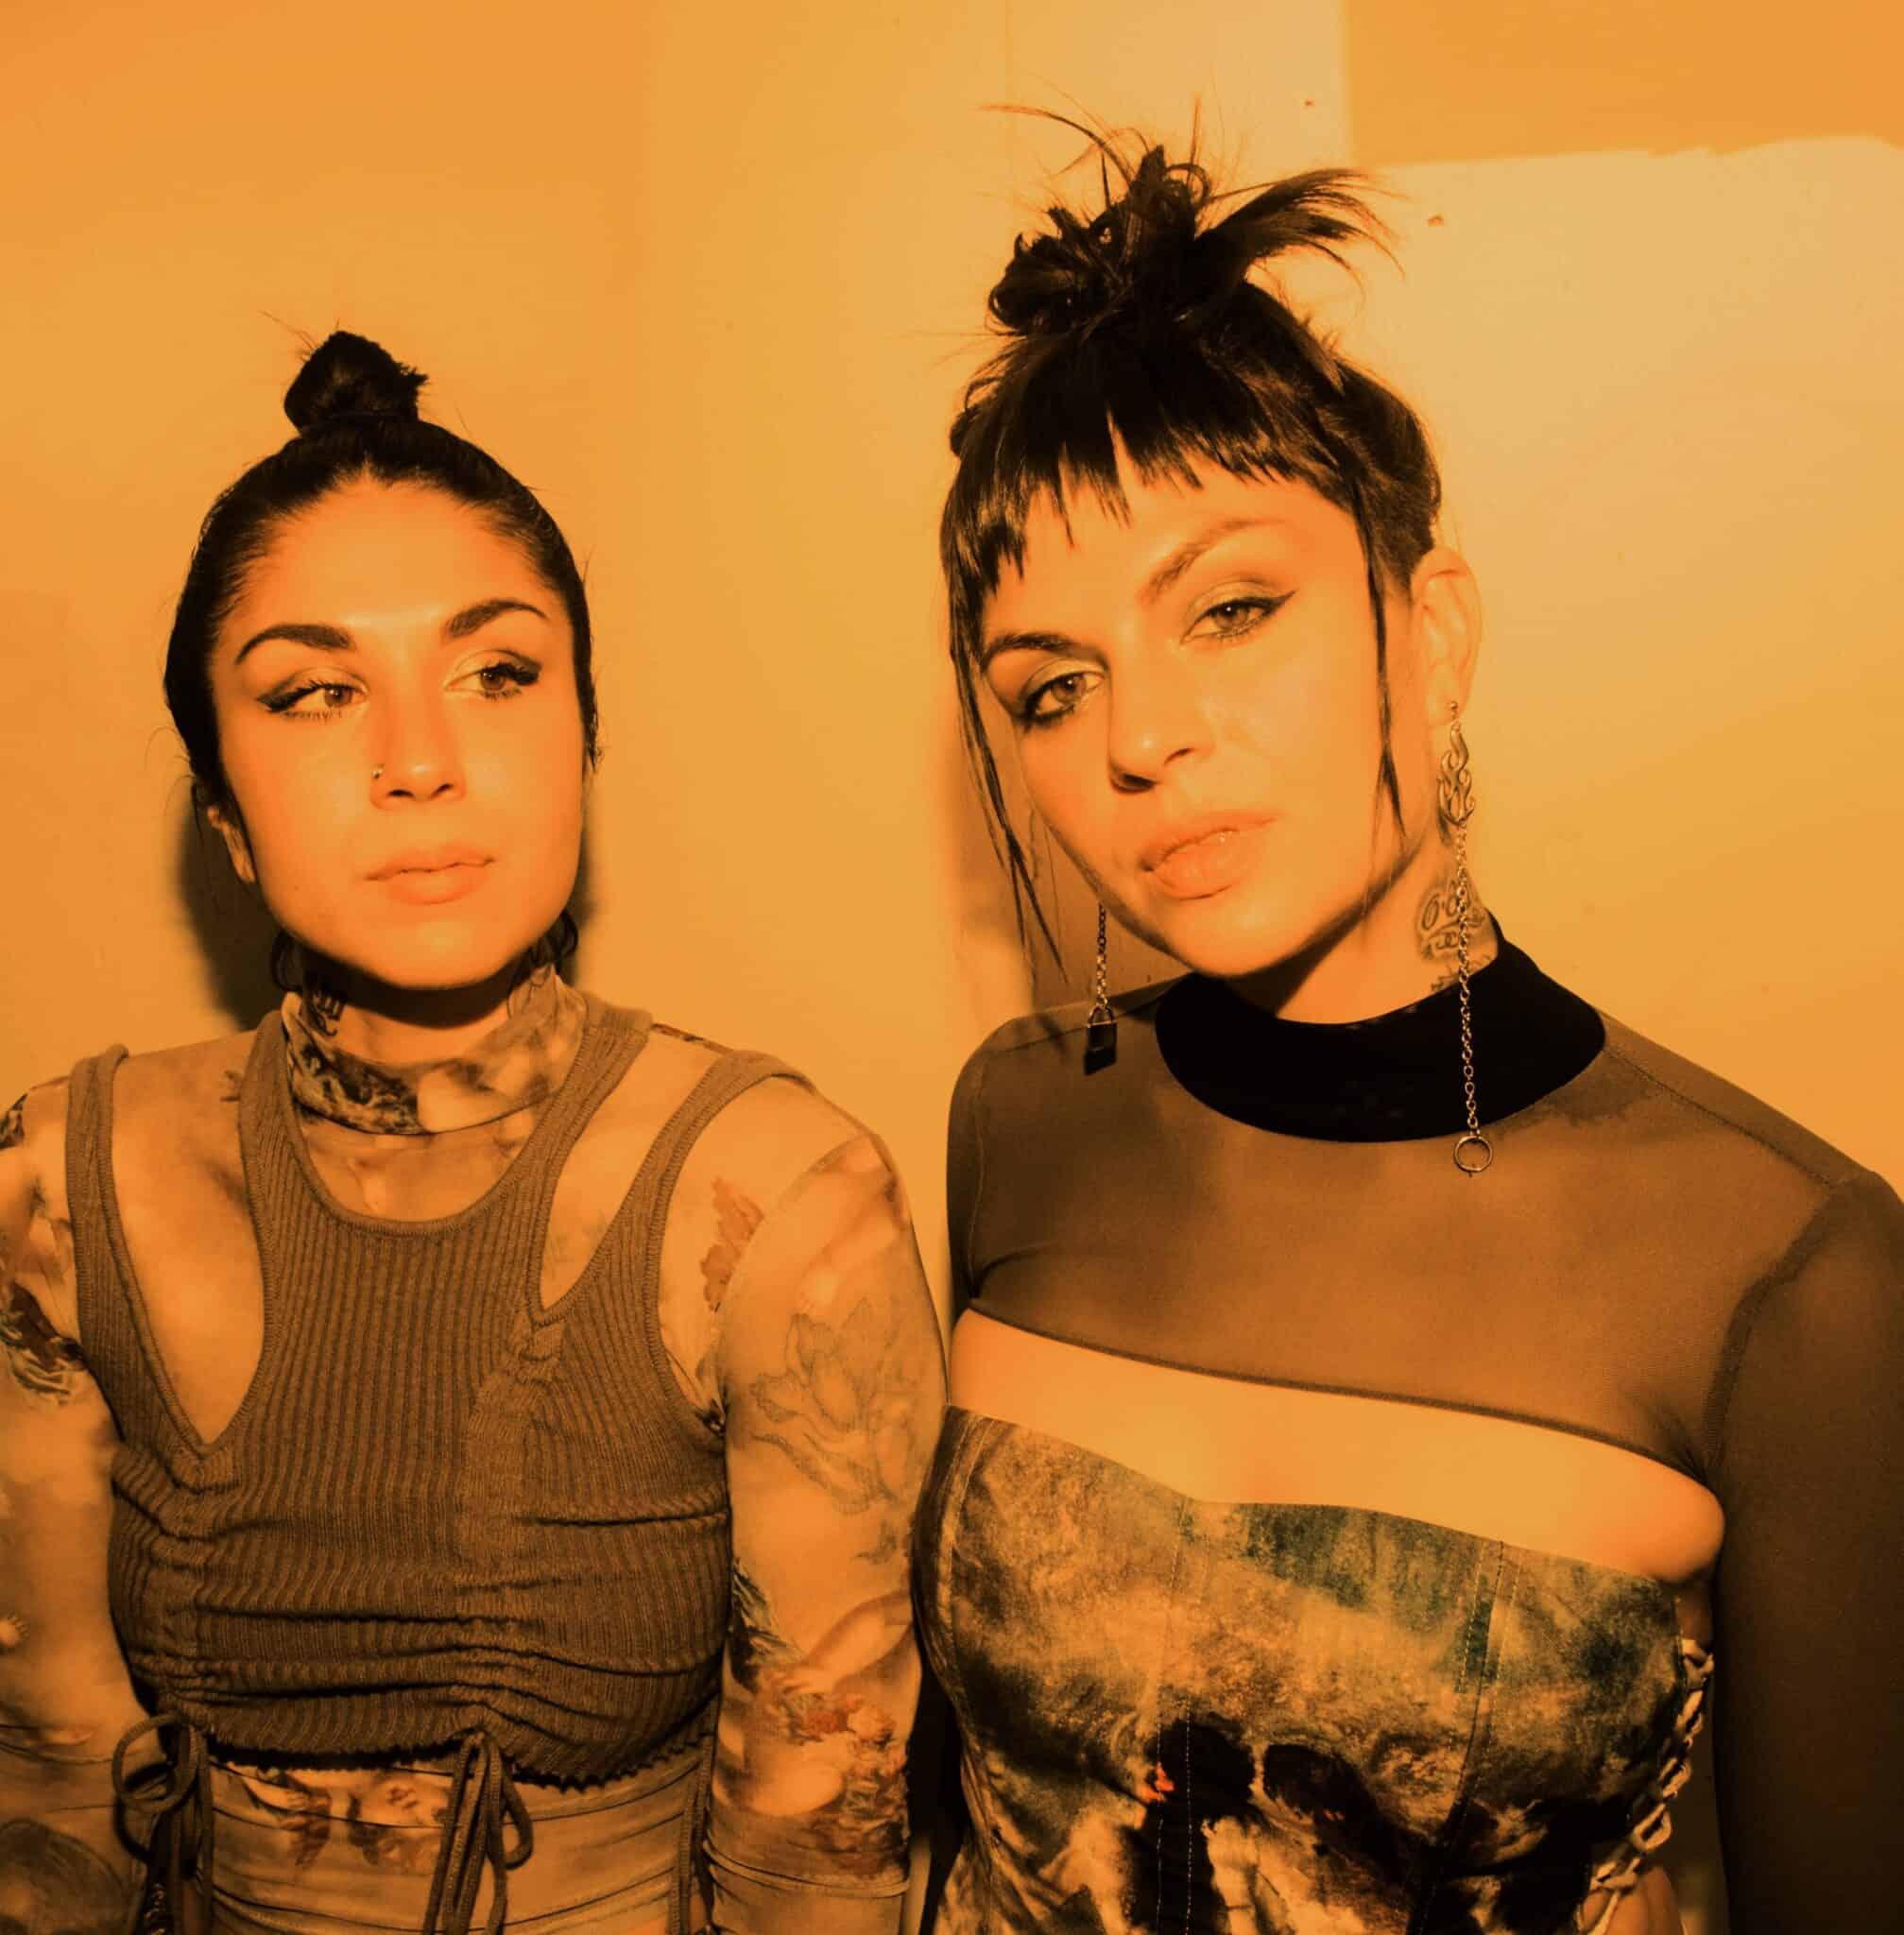 Krewella turns up the pace with monstrous new DnB track, ‘I'm Just A Monster Underneath, My Darling’: Listen